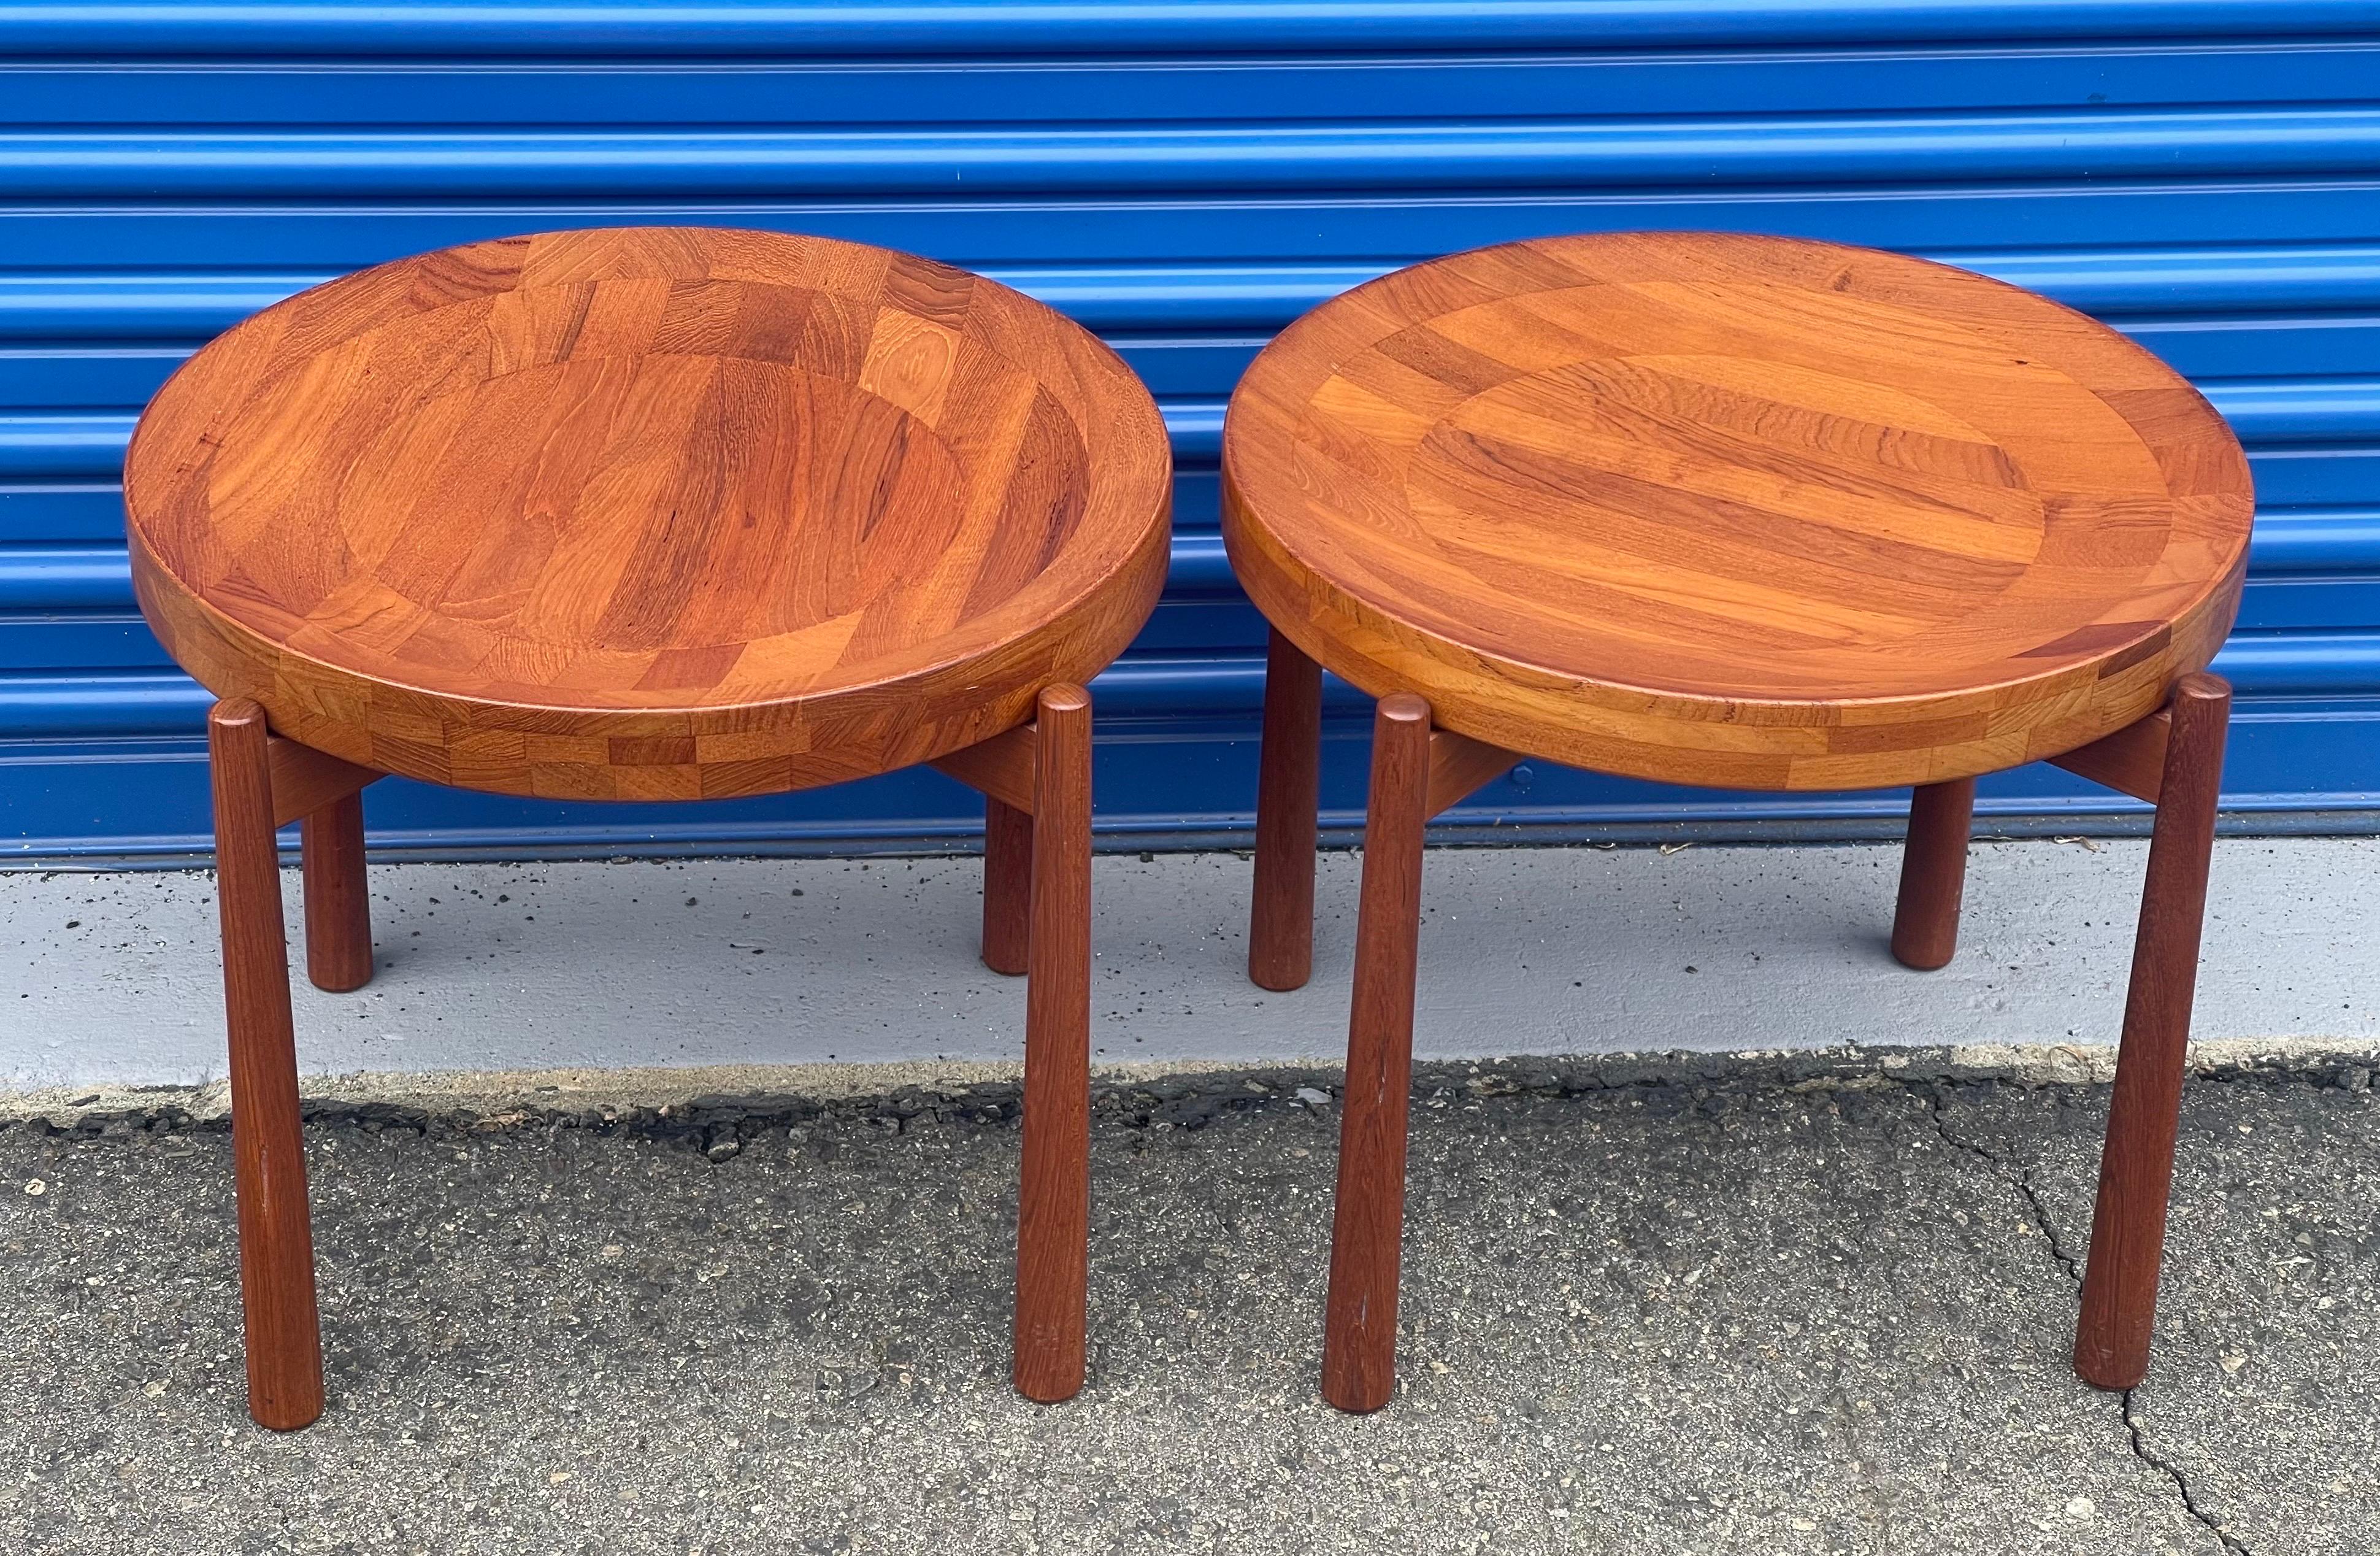 Pair of Teak Tray Side Tables Attributed to Jens Quistgaard for DUX of Sweden For Sale 1